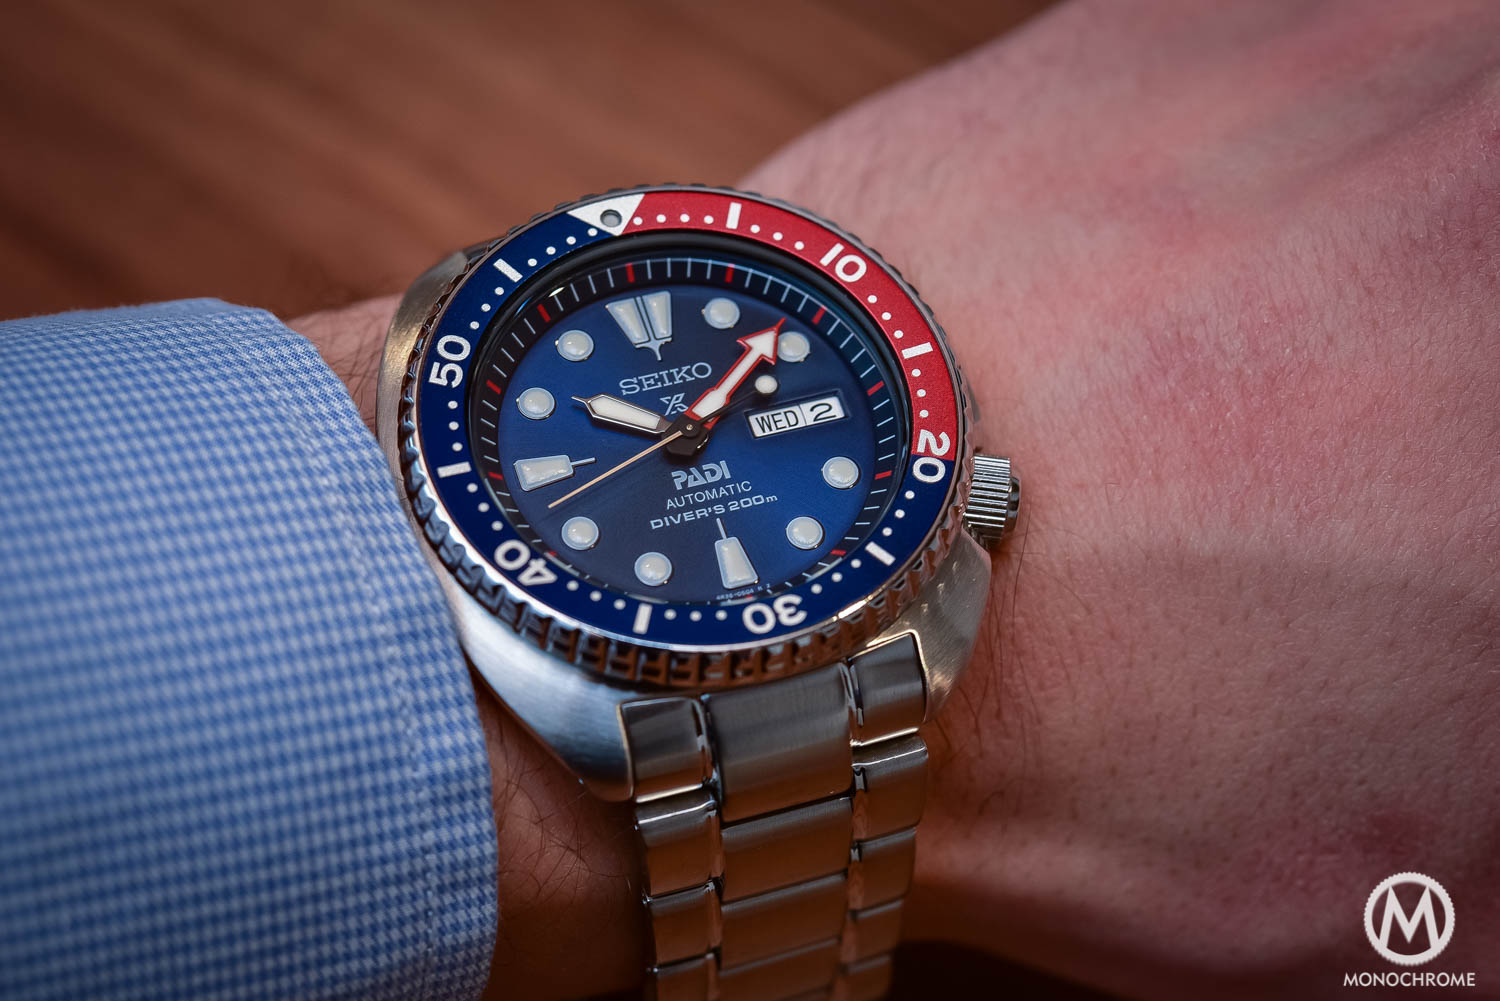 Reviewing The Seiko Prospex SRPA21 PADI Turtle Watch - The Best Swiss ...